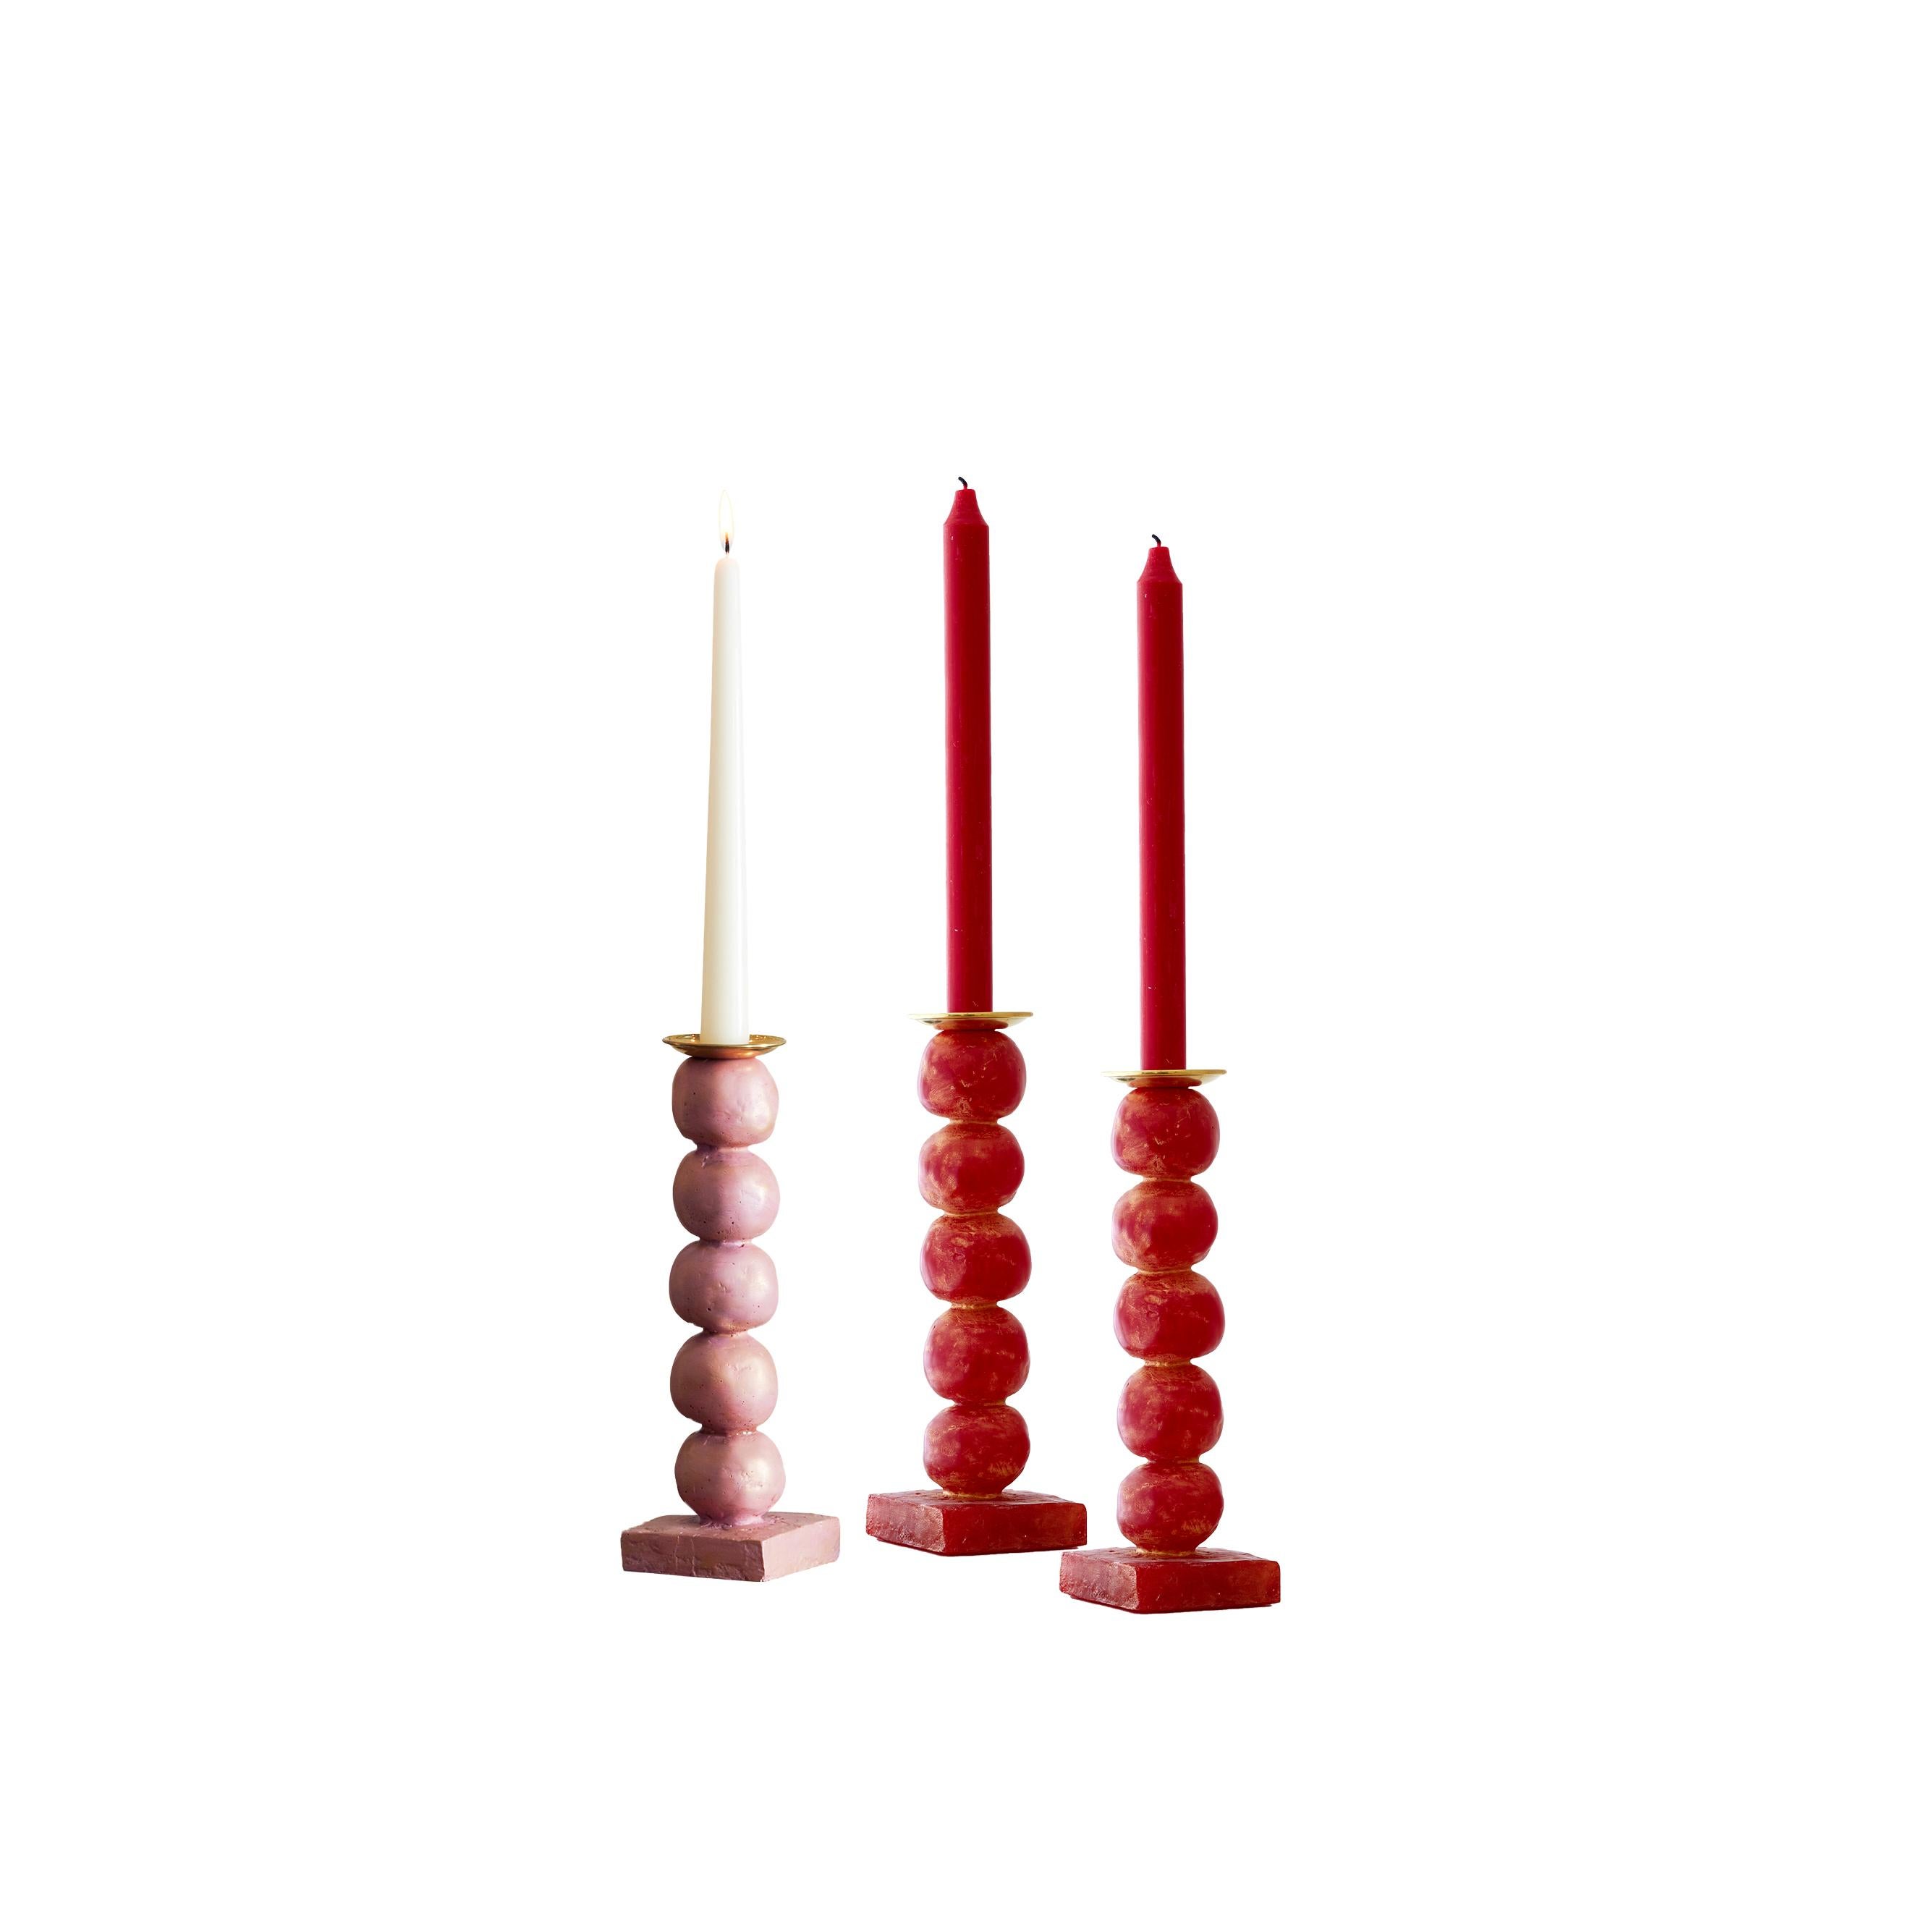 English European Contemporary Red Sculptural Candlesticks by Margit Wittig For Sale